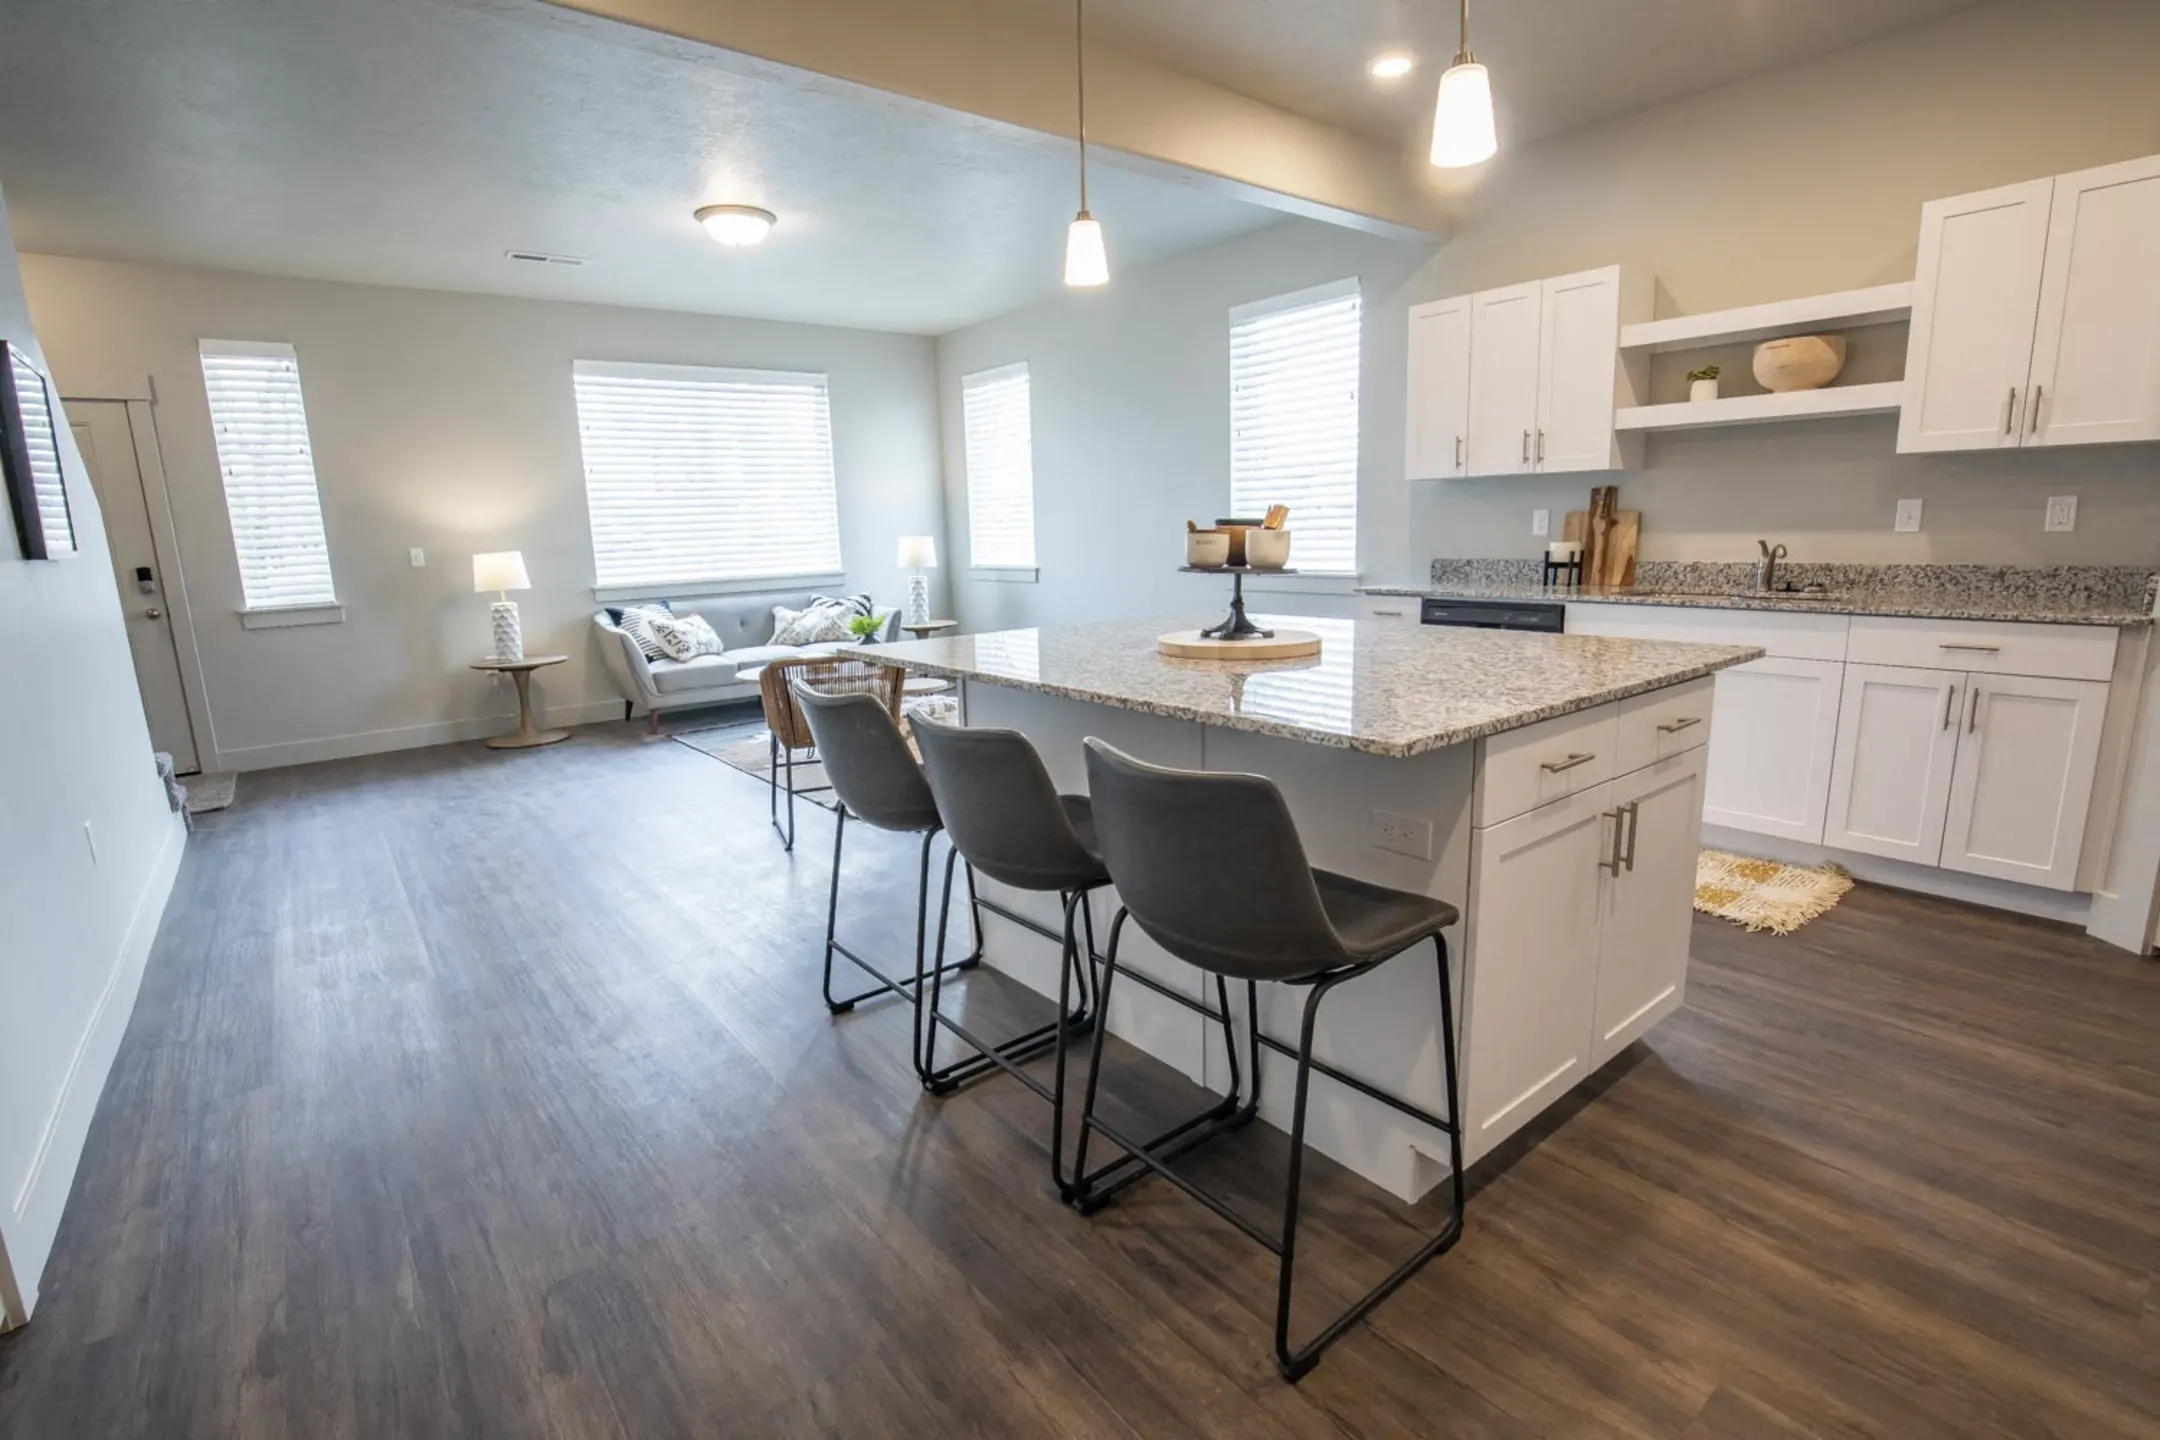 Kitchen - Haven Cove Townhomes - West Haven, UT